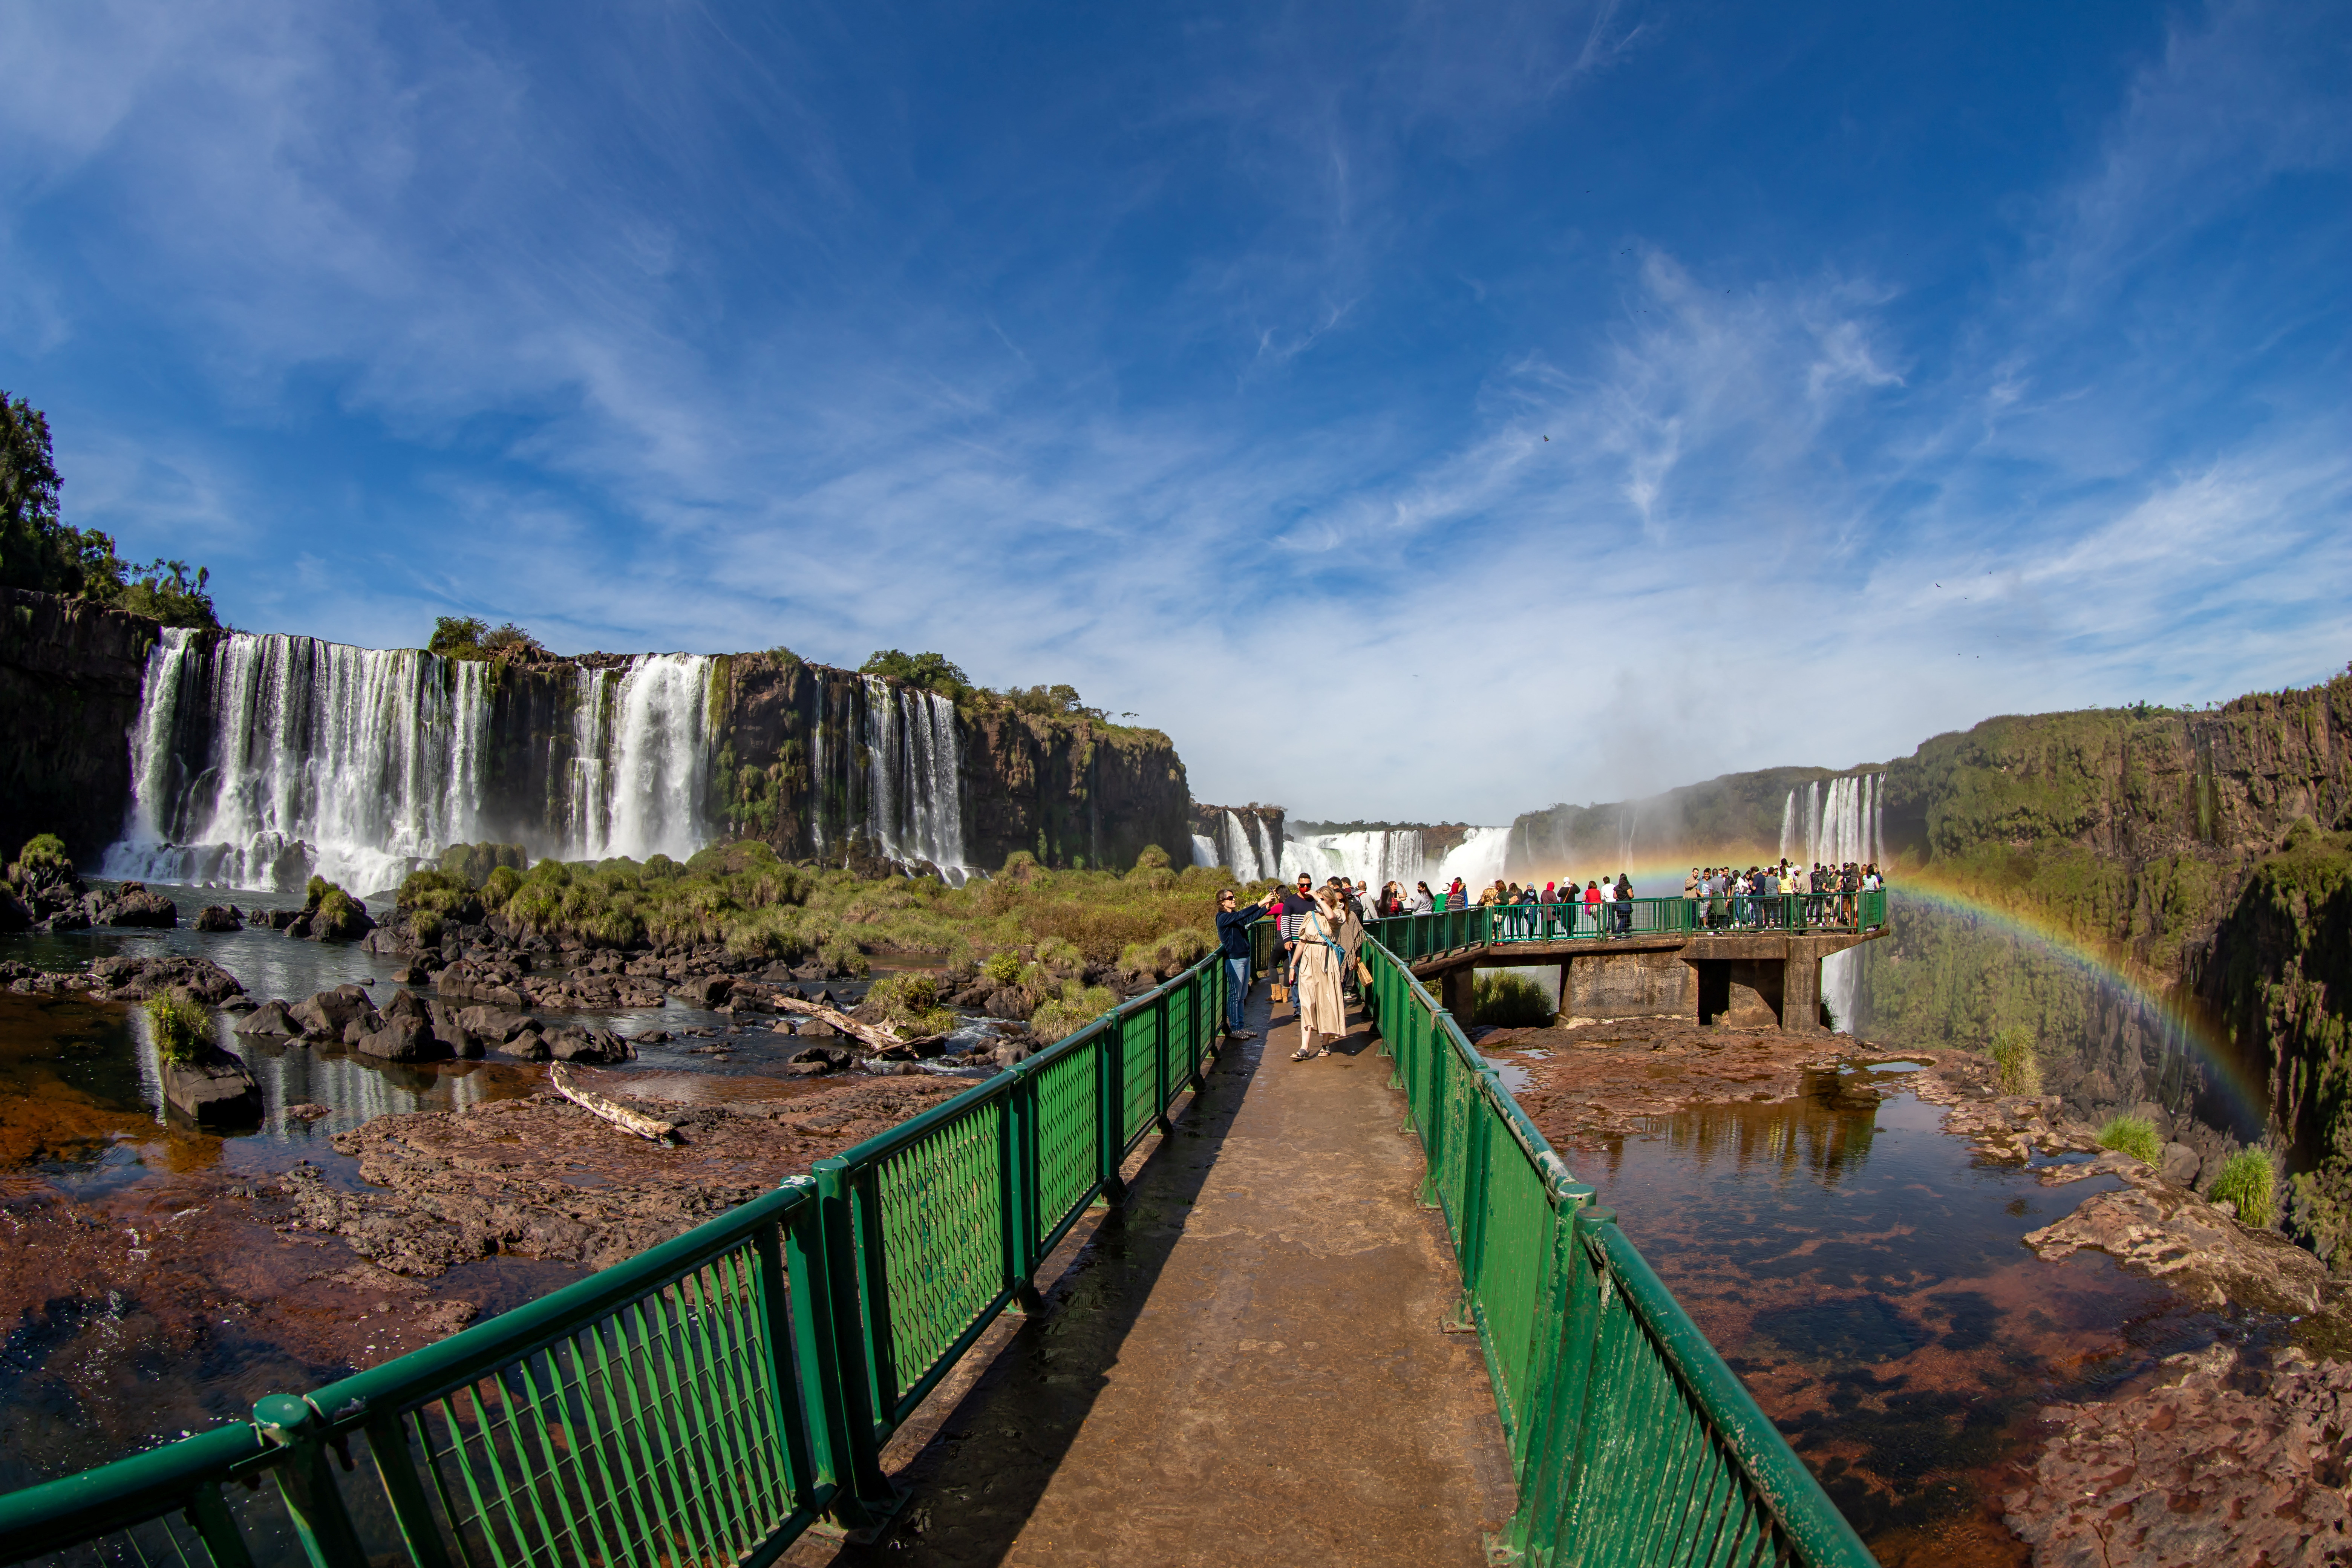 At every opportunity, Iguazú becomes one of the most chosen destinations.  (REUTERS/Kiko Sierich DO NOT RESPONSIBLE. DO NOT ARCHIVE)